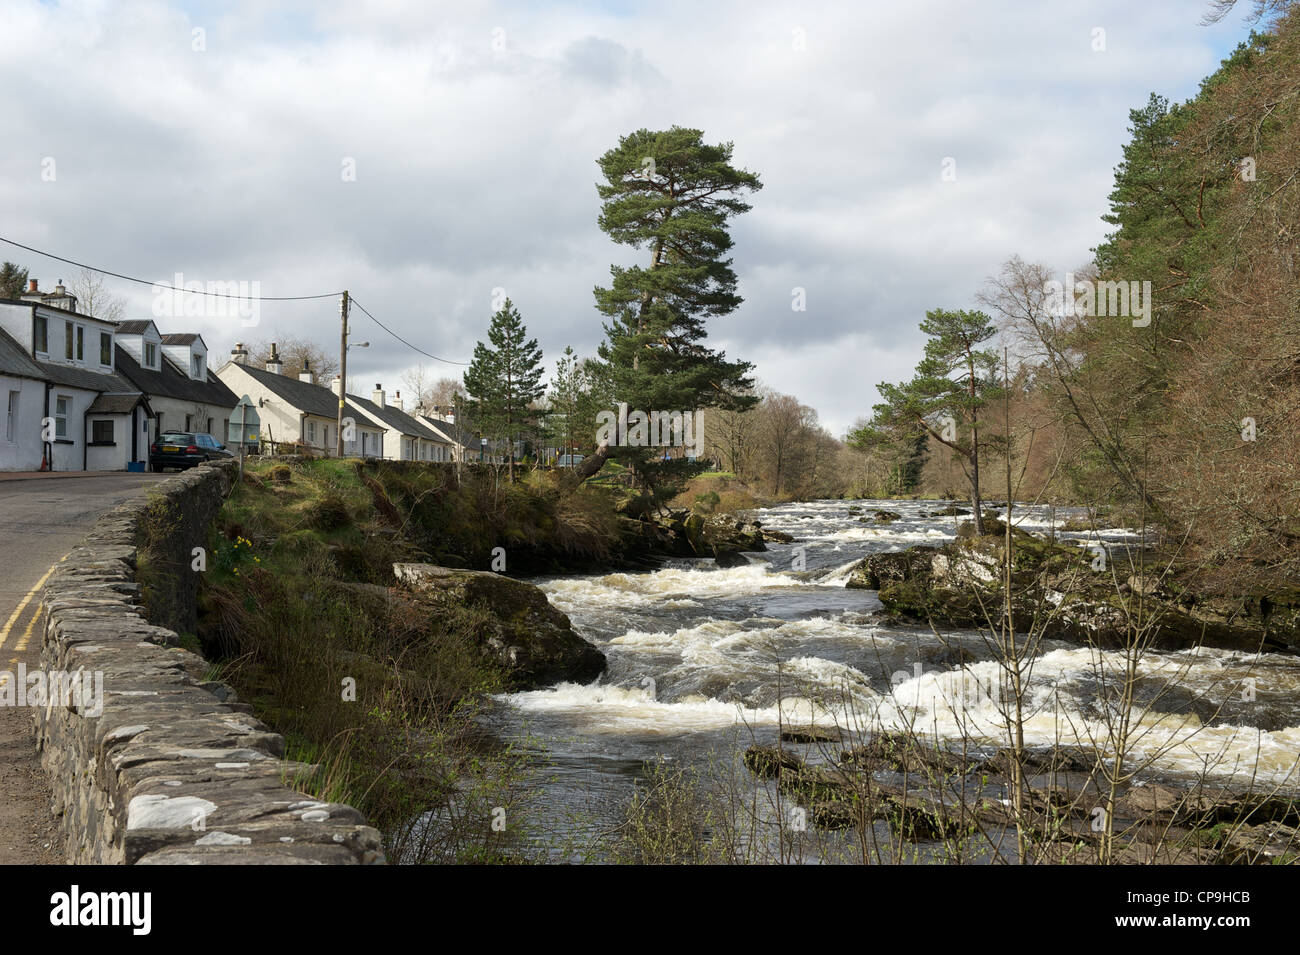 Killin the picturesque village at the head of Loch Tay and the water falls from the River Dochart that flow through the village Stock Photo